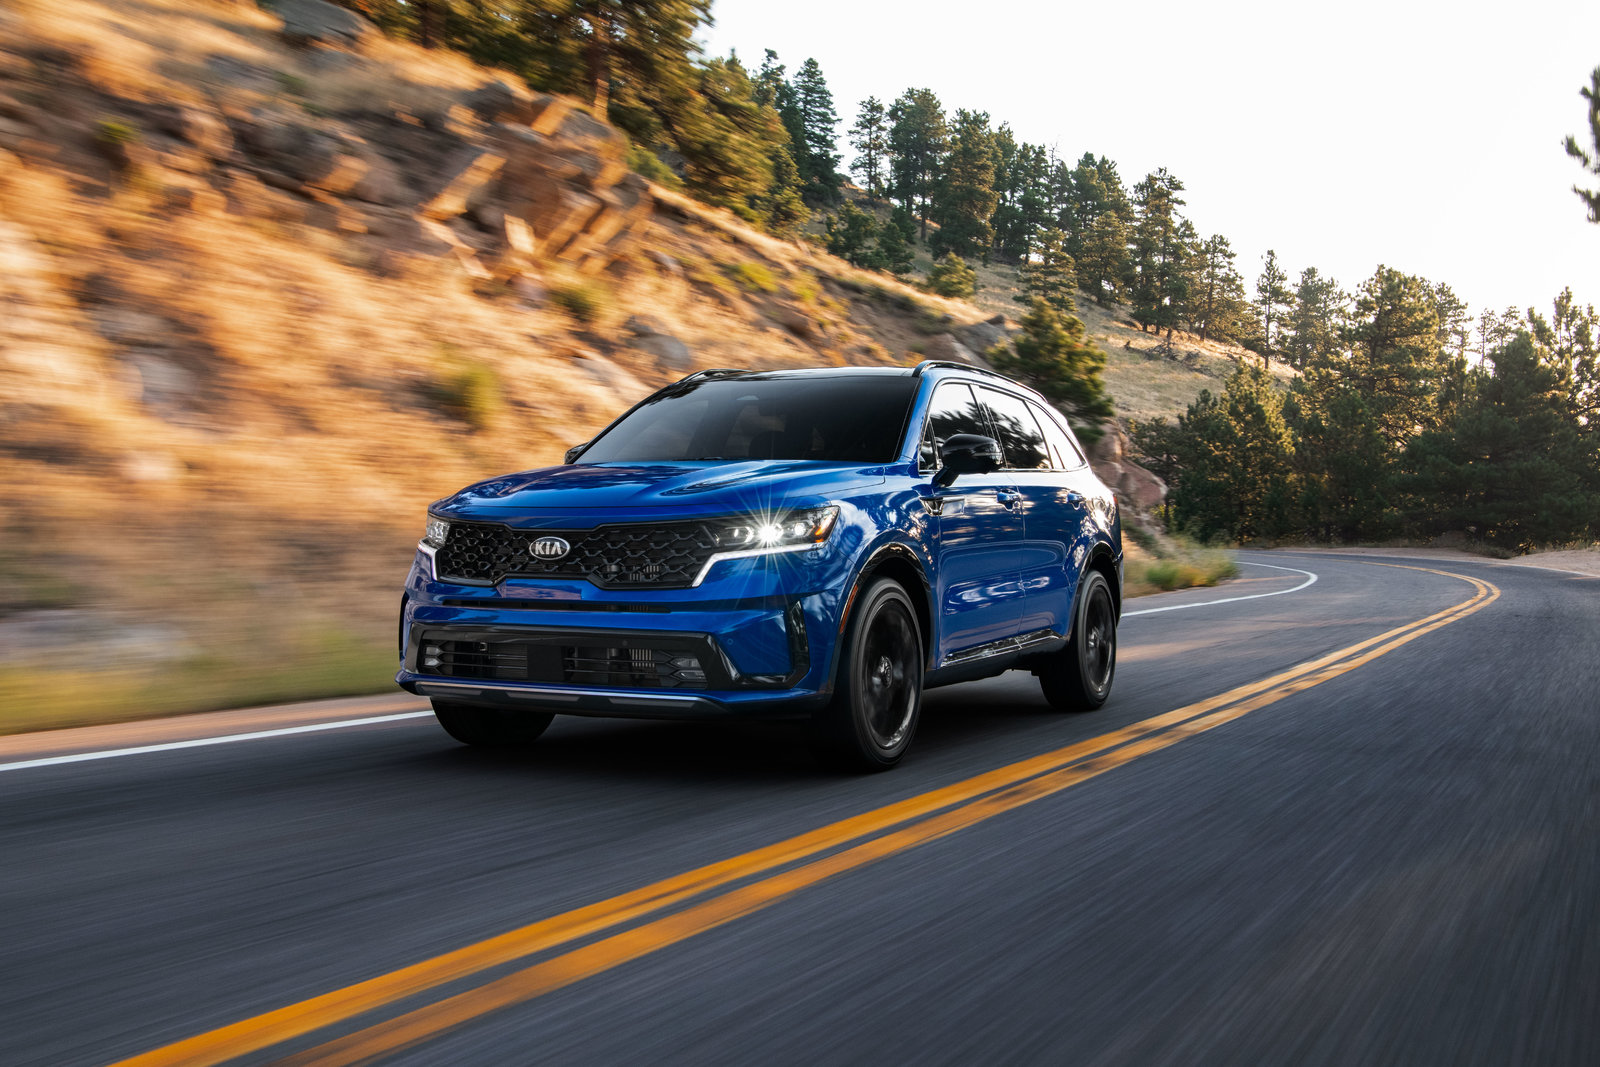 These Are The Canadian-Market Differences Between The 2020 Kia Sorento And The All-New 2021 Kia Sorento